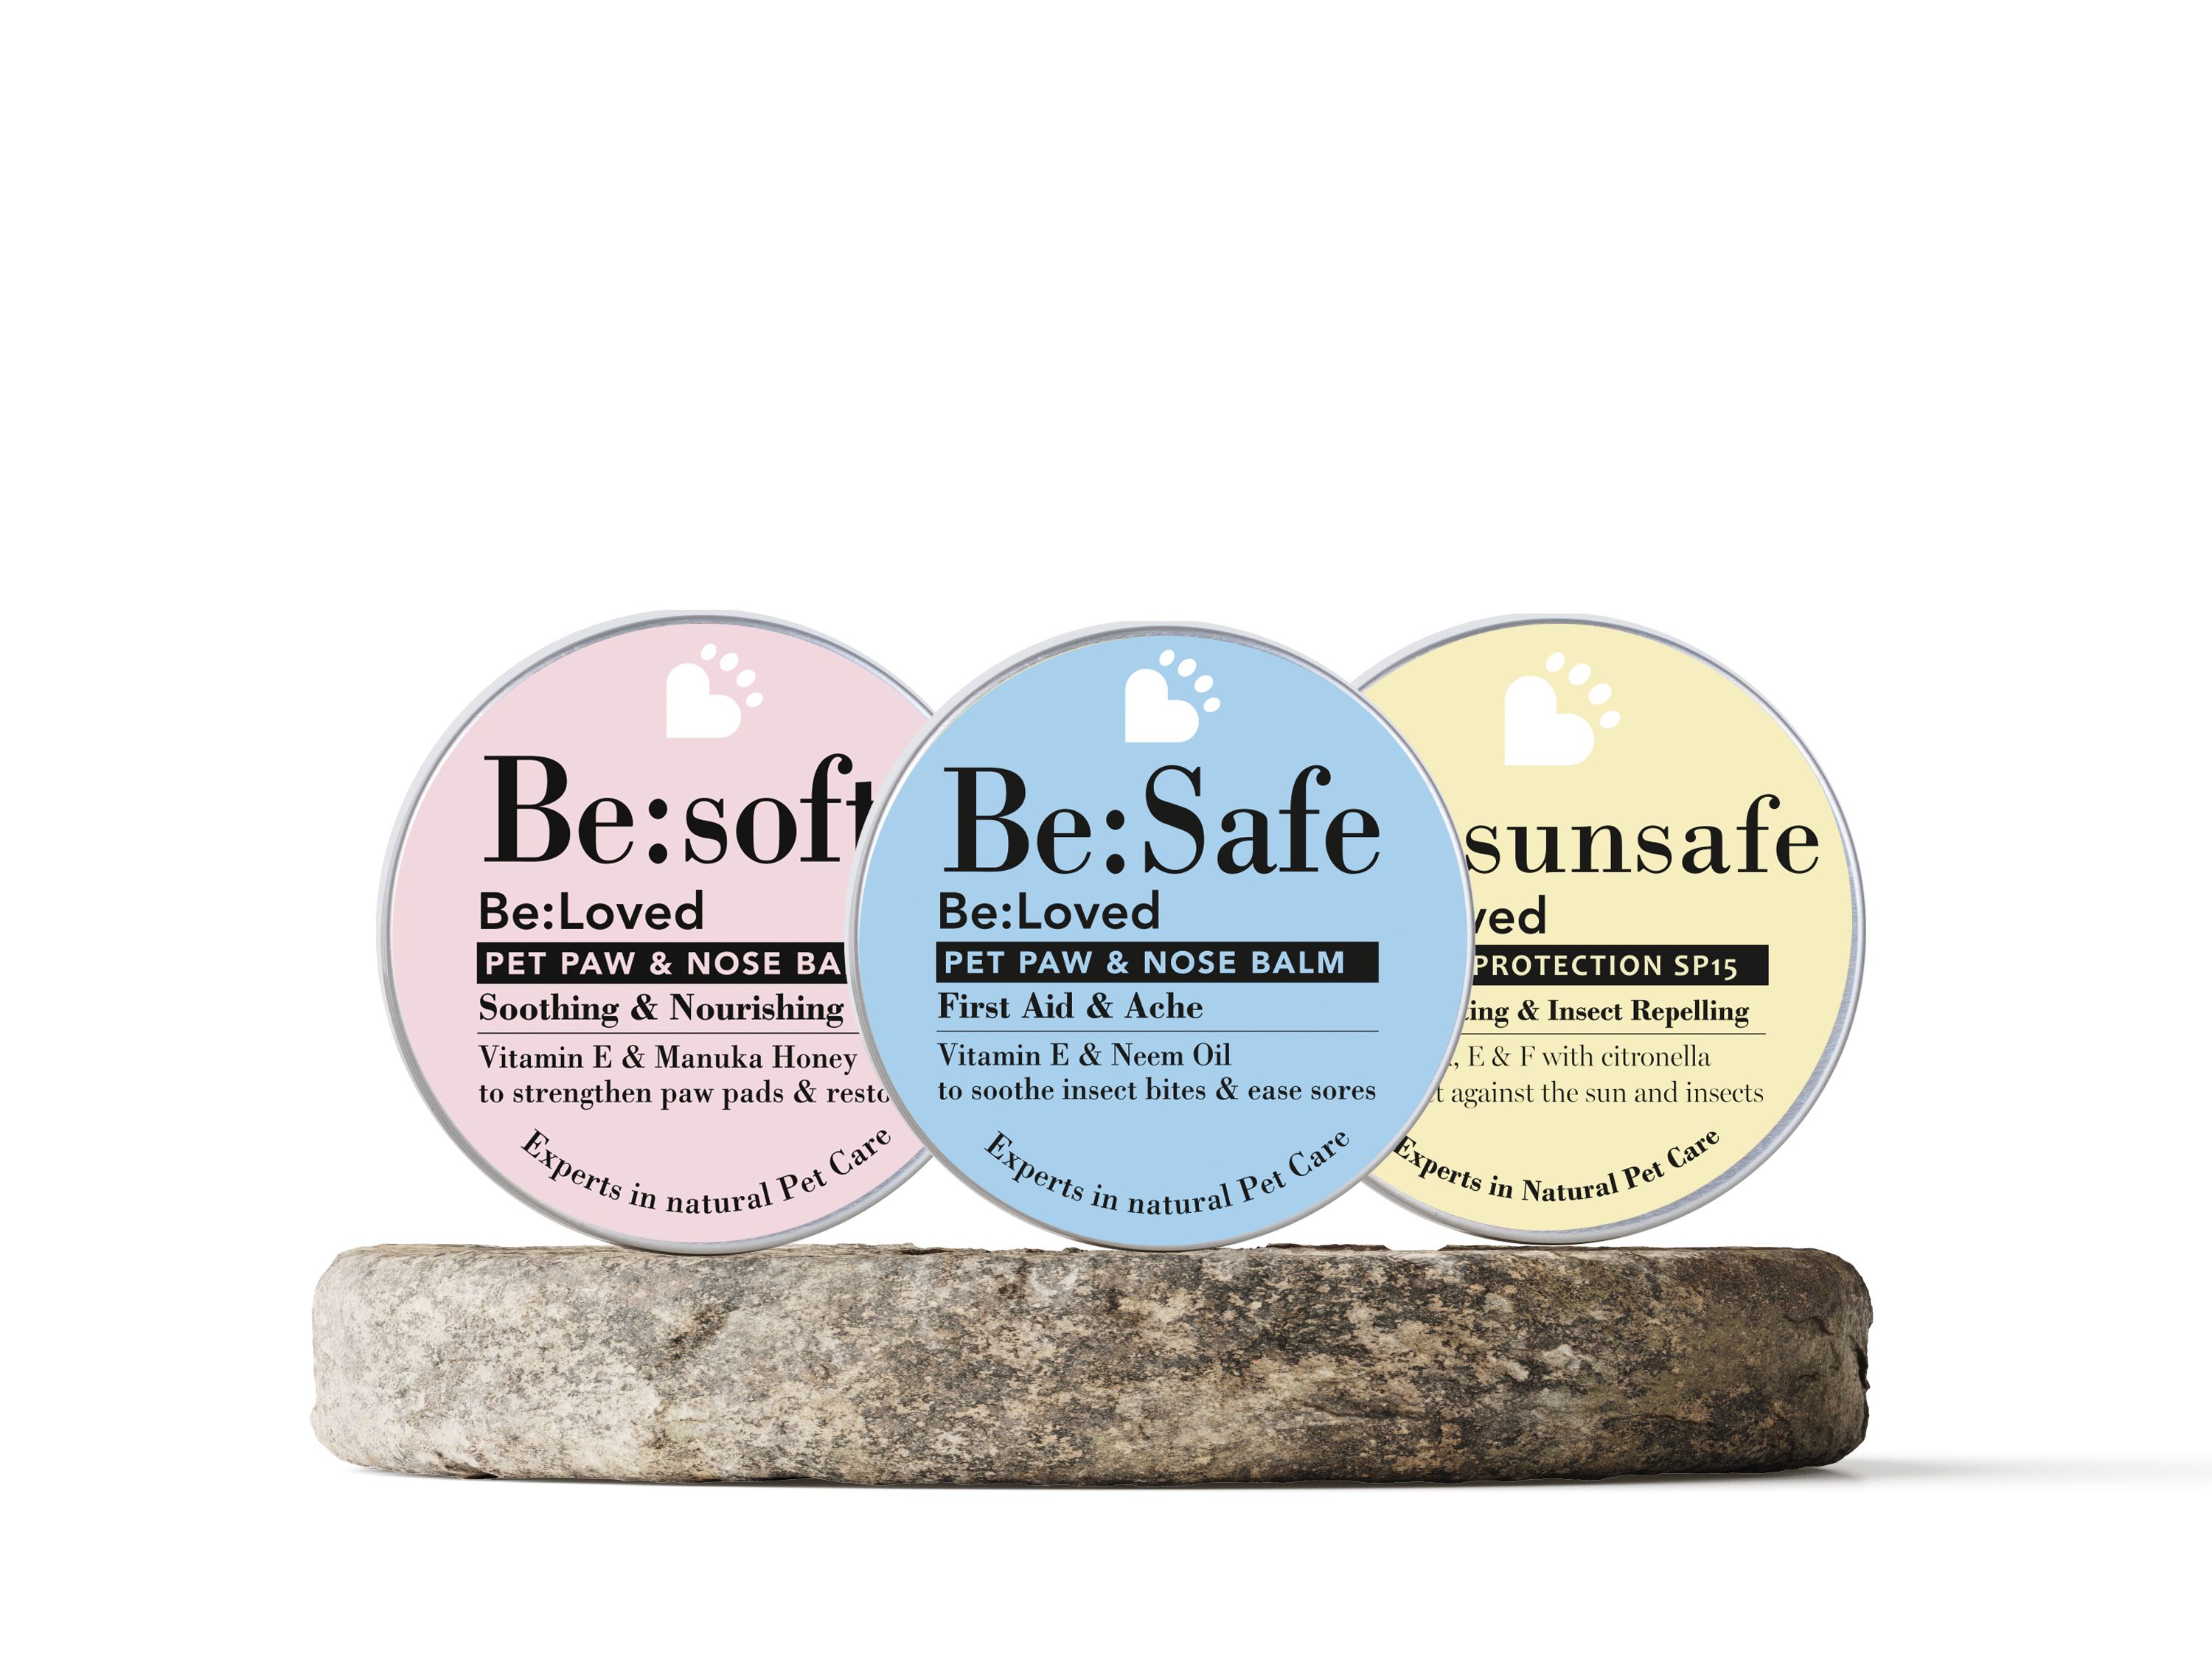 Be:Soft, Be:Safe and Be:Sunsafe Pet Paw and Nose Balms